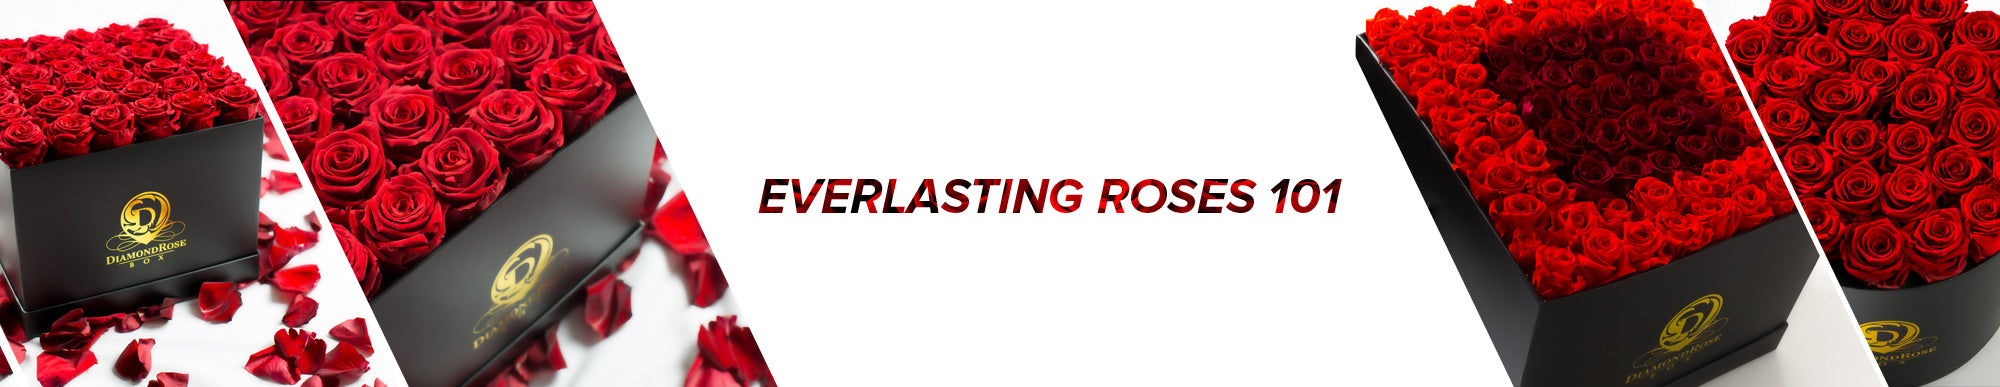 About Everlasting Roses